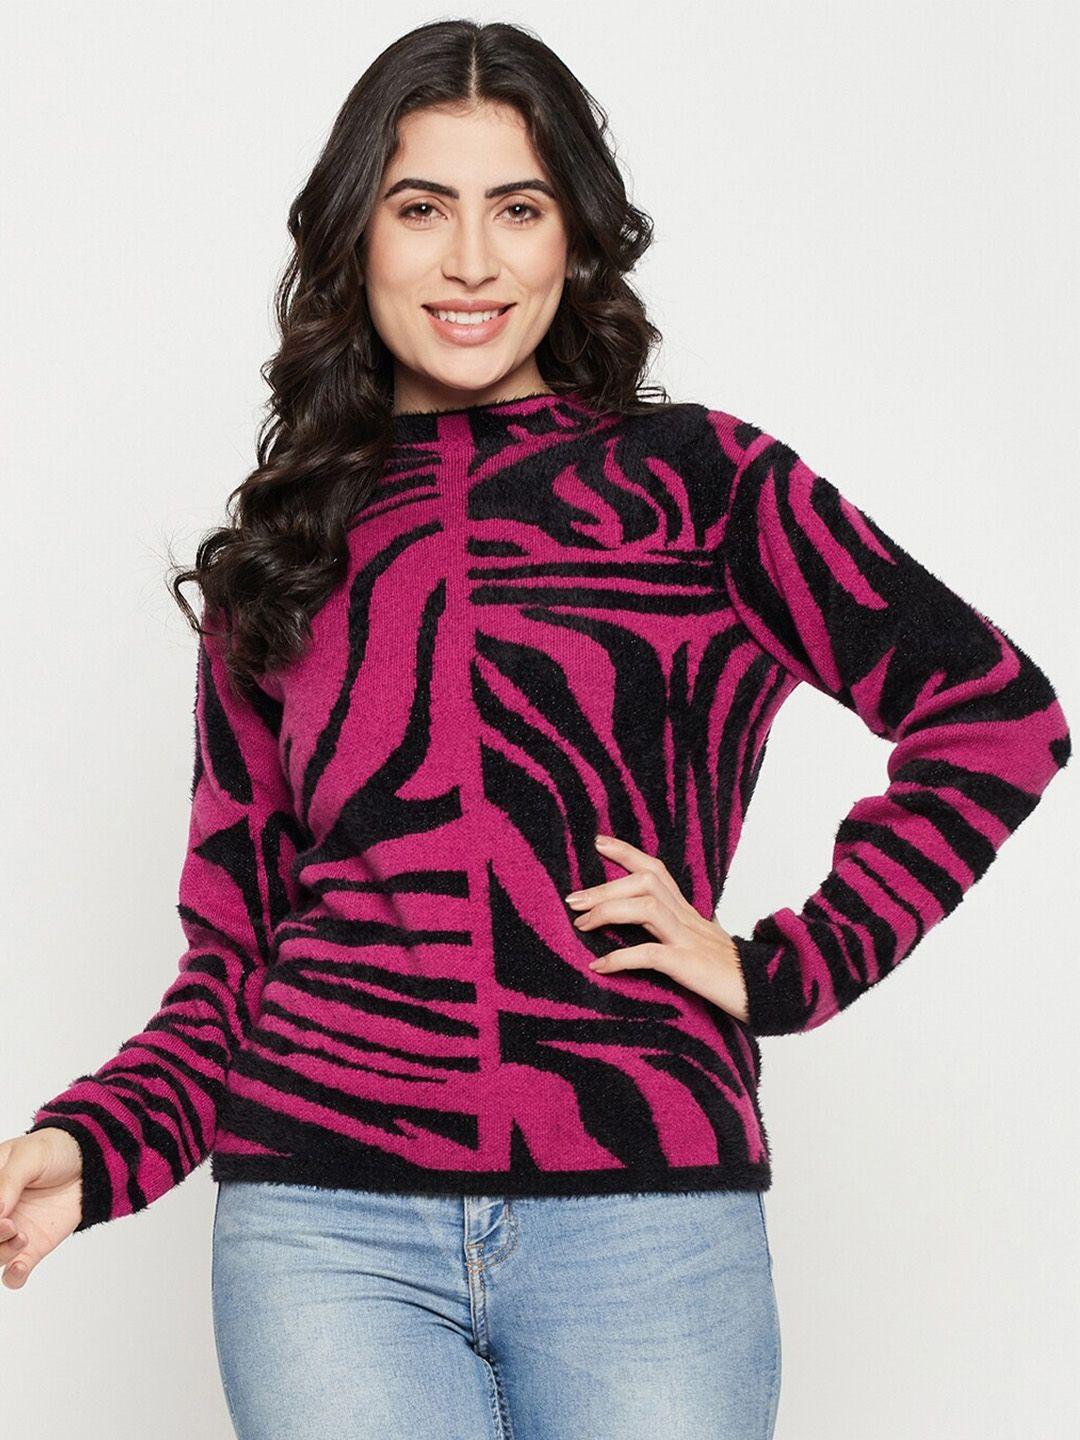 madame abstract printed round neck long sleeve acrylic pullover sweaters